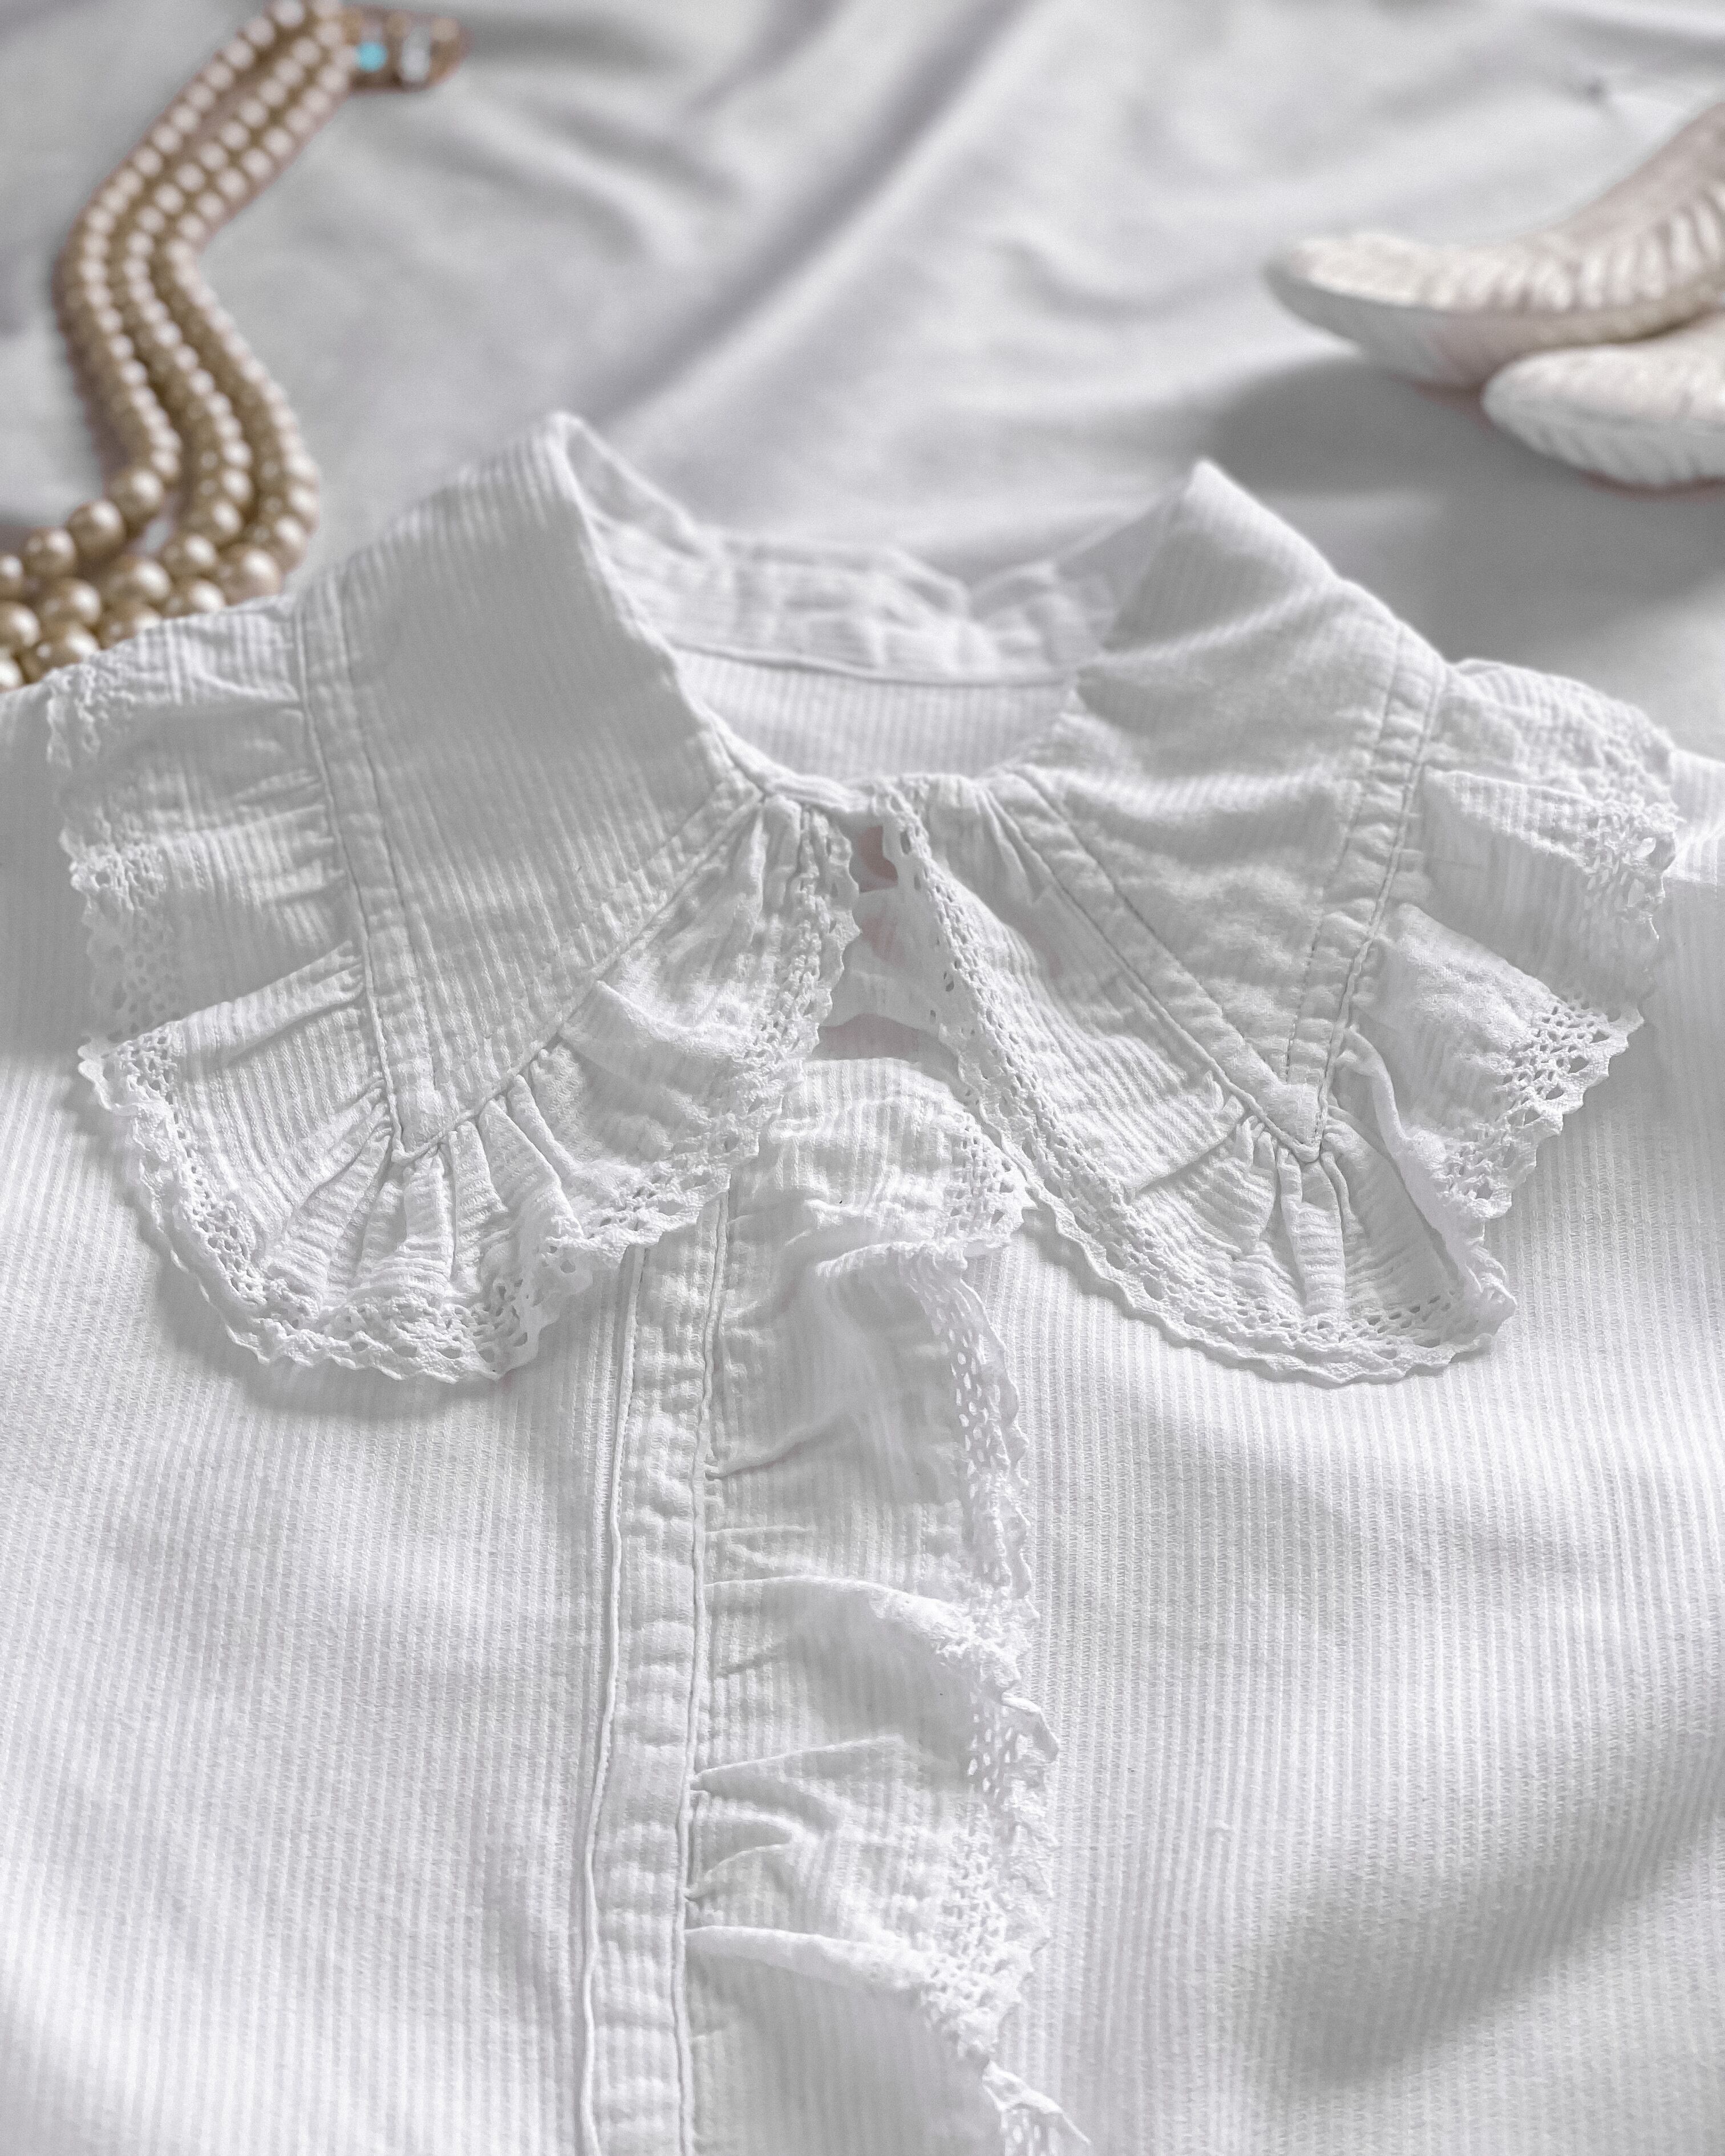 France Antique Edwardian Cotton Pique Blouse / フランスアンティーク コットンピケ ブラウス |  BOUDOIR powered by BASE